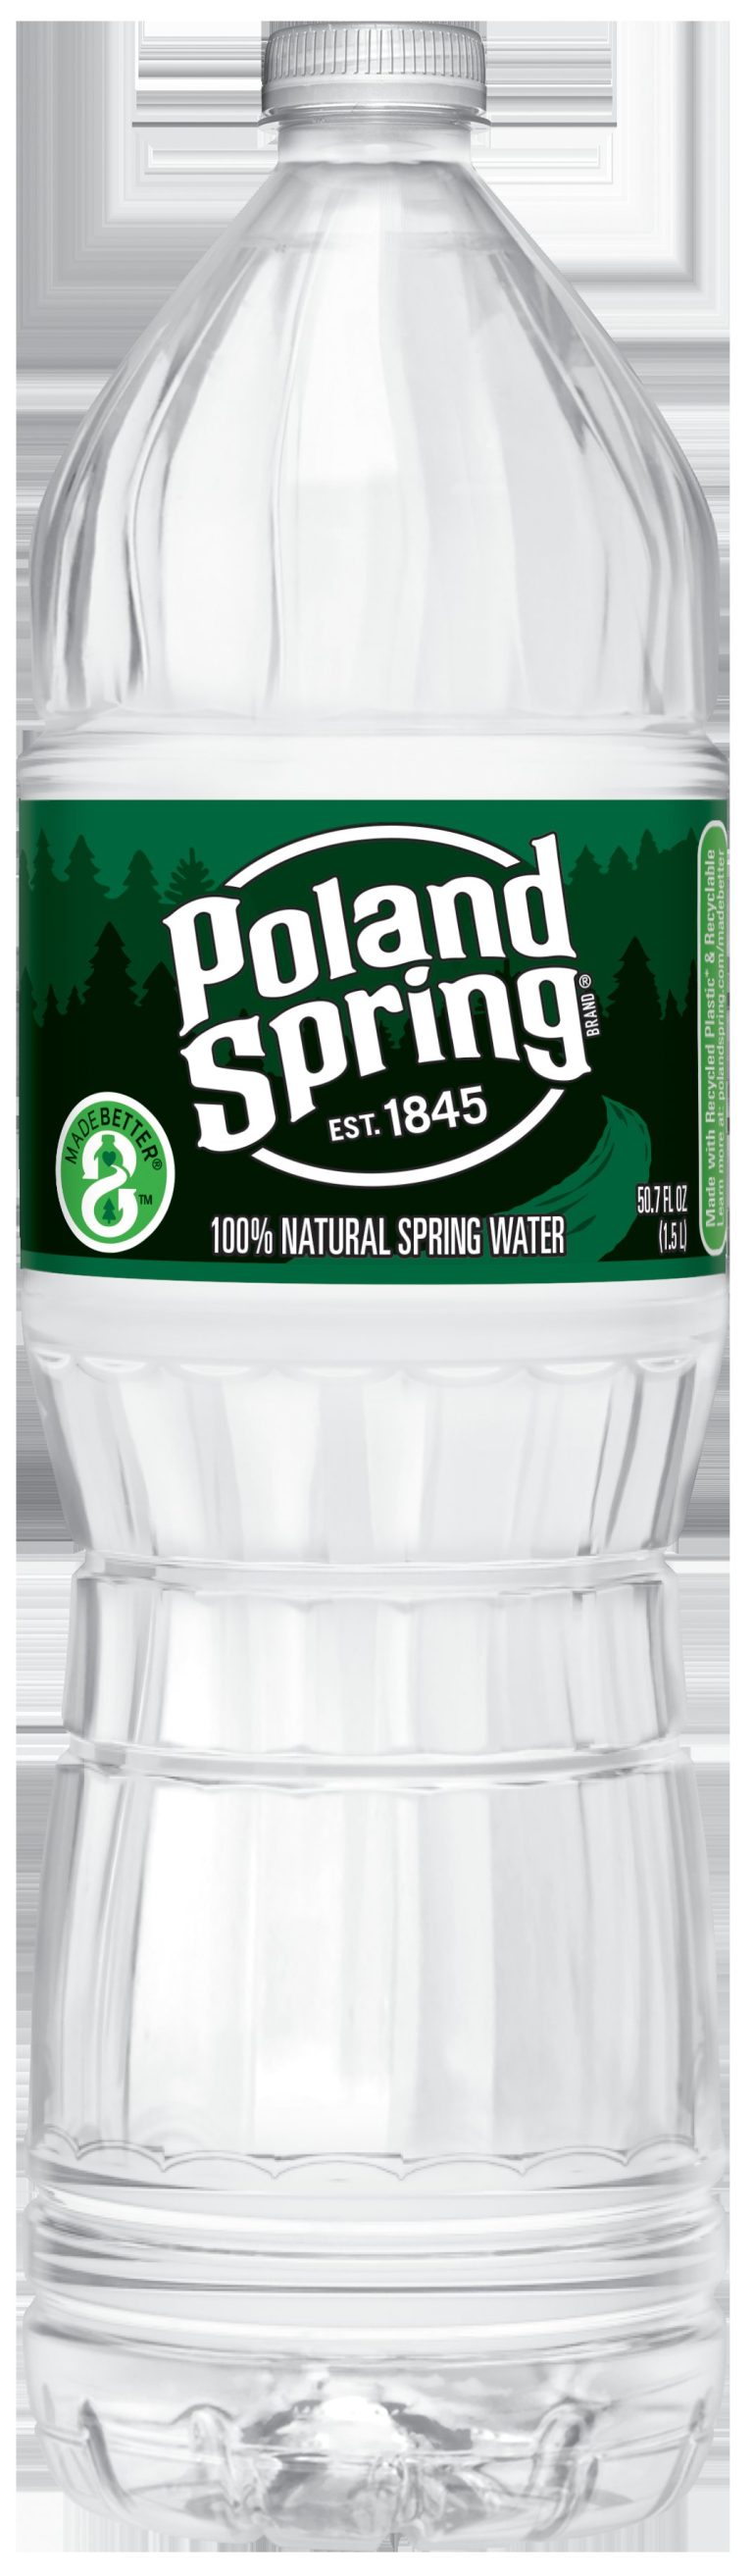 The Benefits Of Poland Spring 1.5 Liter Case: Hydration Made Easy